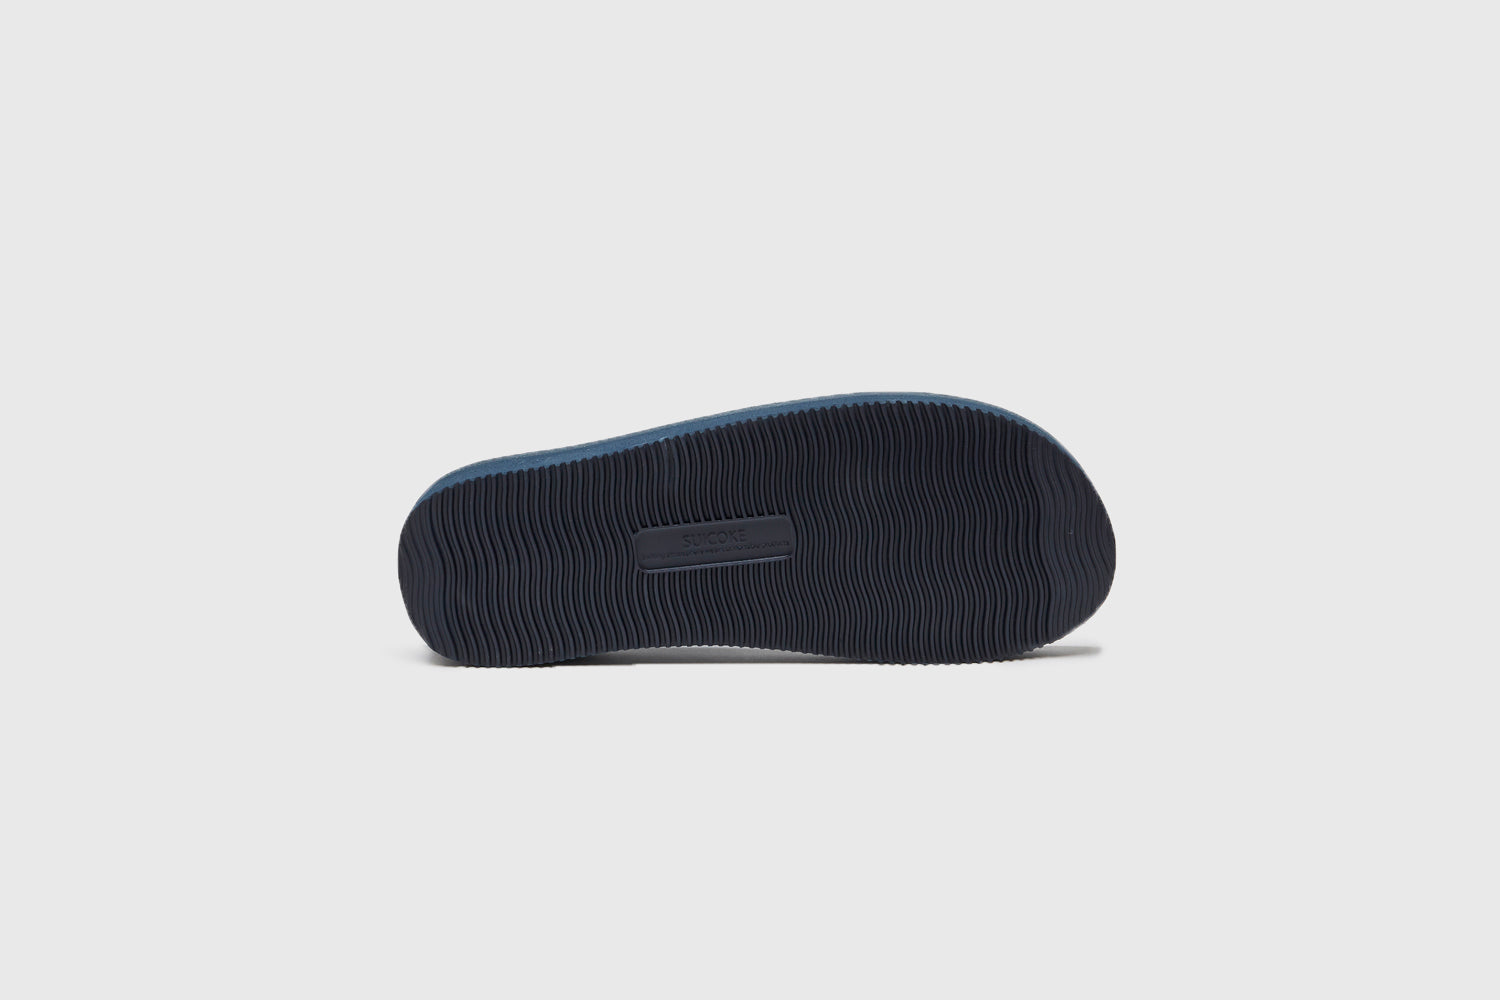 SUICOKE MOTO-Cab slides with navy nylon upper, navy midsole and sole, straps and logo patch. From Spring/Summer 2023 collection on eightywingold Web Store, an official partner of SUICOKE. OG-056CAB NAVY